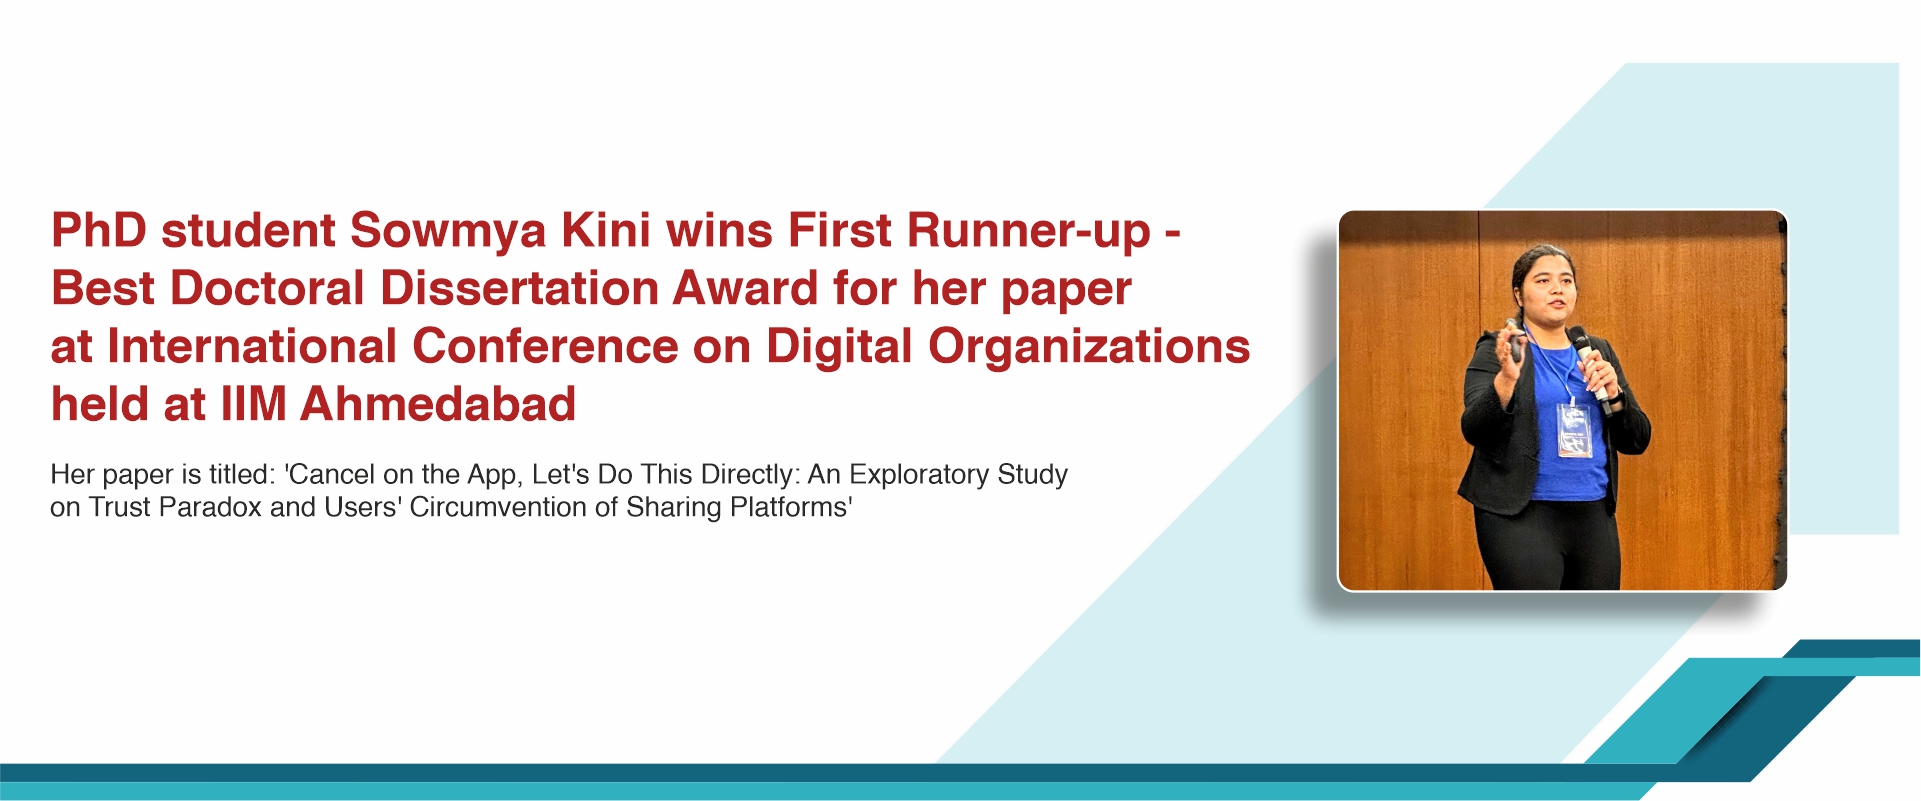 PhD student Sowmya Kini wins First Runner-up - Best Doctoral Dissertation Award for her paper at International Conference on Digital Organizations held at IIM Ahmedabad 